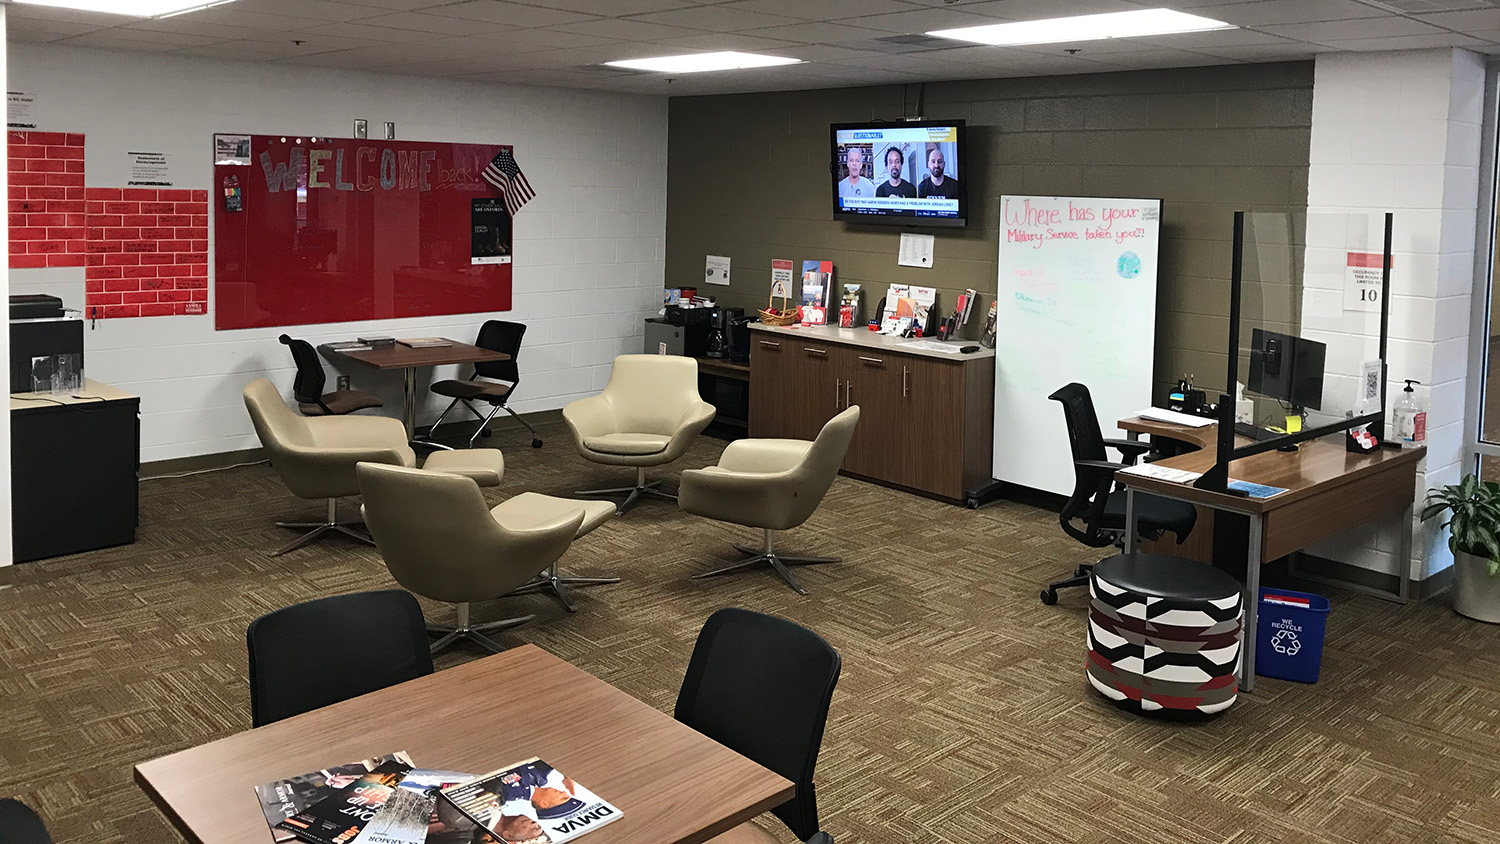 A revamped student lounge with a television, sectional, comfortable chairs, refrigerator and microwave will be a key component of the the Jeffrey Wright Military and Veteran Services' newly-renovated space on the first floor of Witherspoon Student Center.